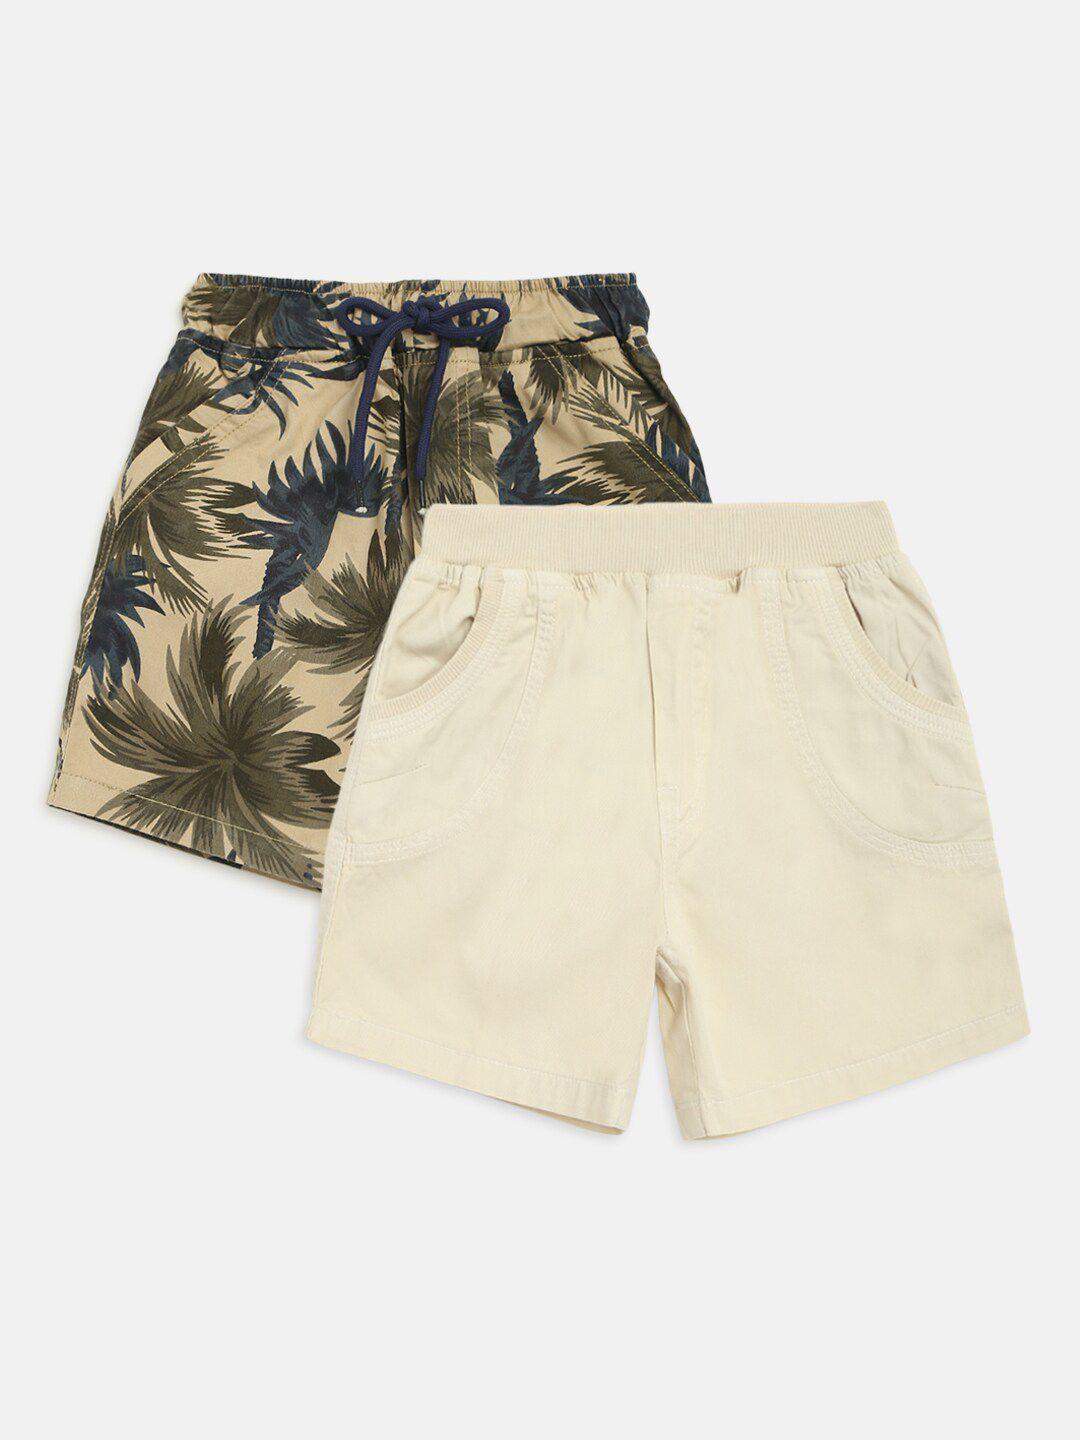 homegrown boys off white & green tropical printed outdoor shorts